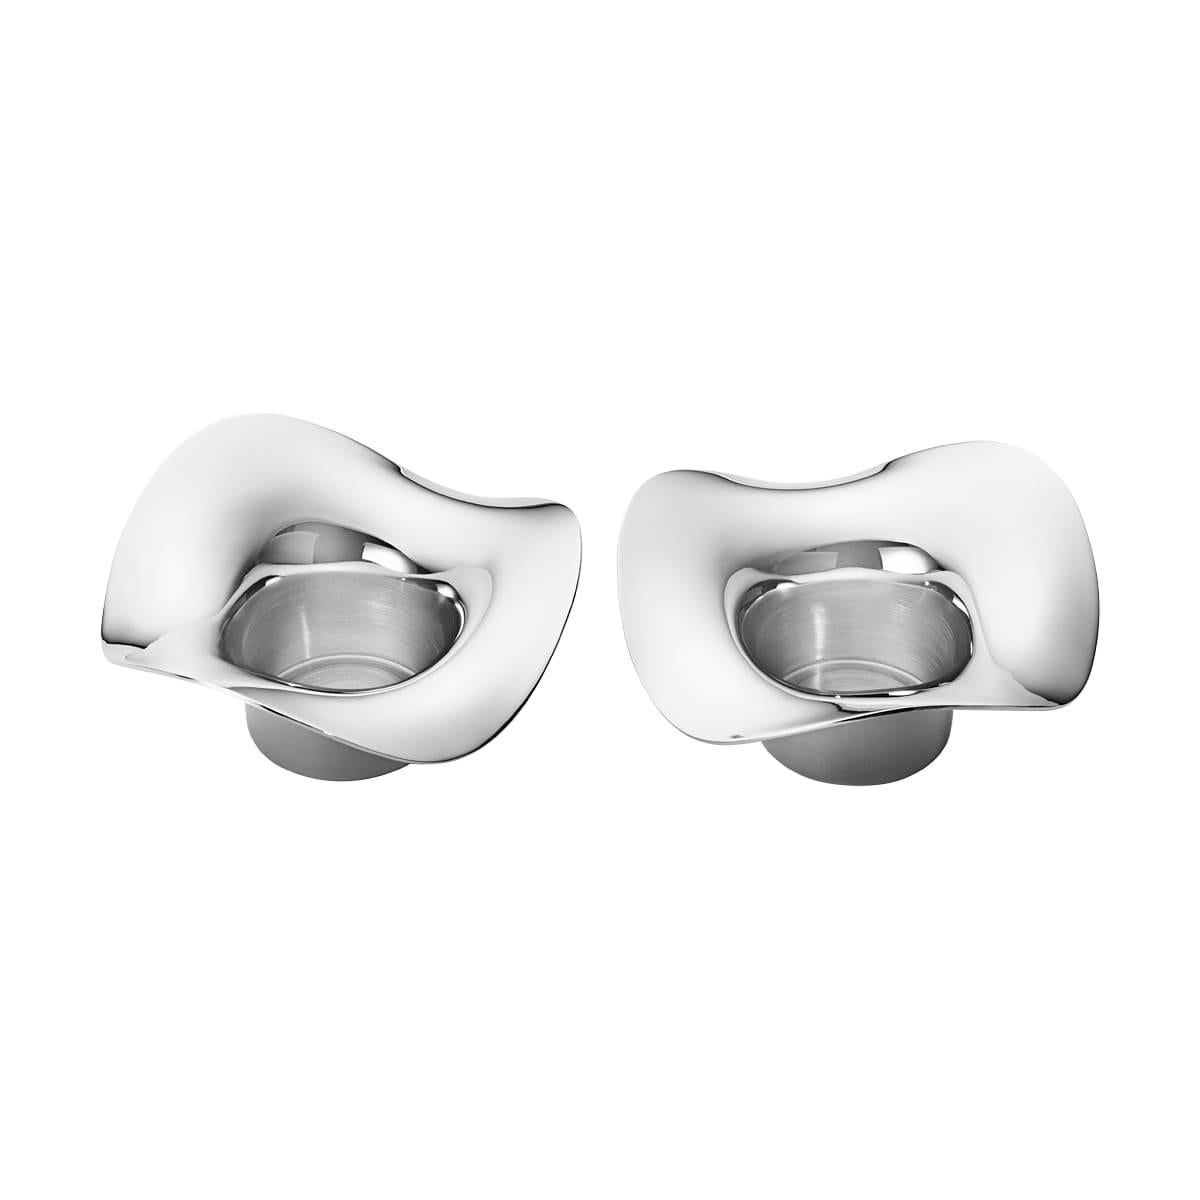 Georg Jensen Cobra Tealights Set in Stainless Steel by Constantin Wortmann In New Condition For Sale In New York, NY